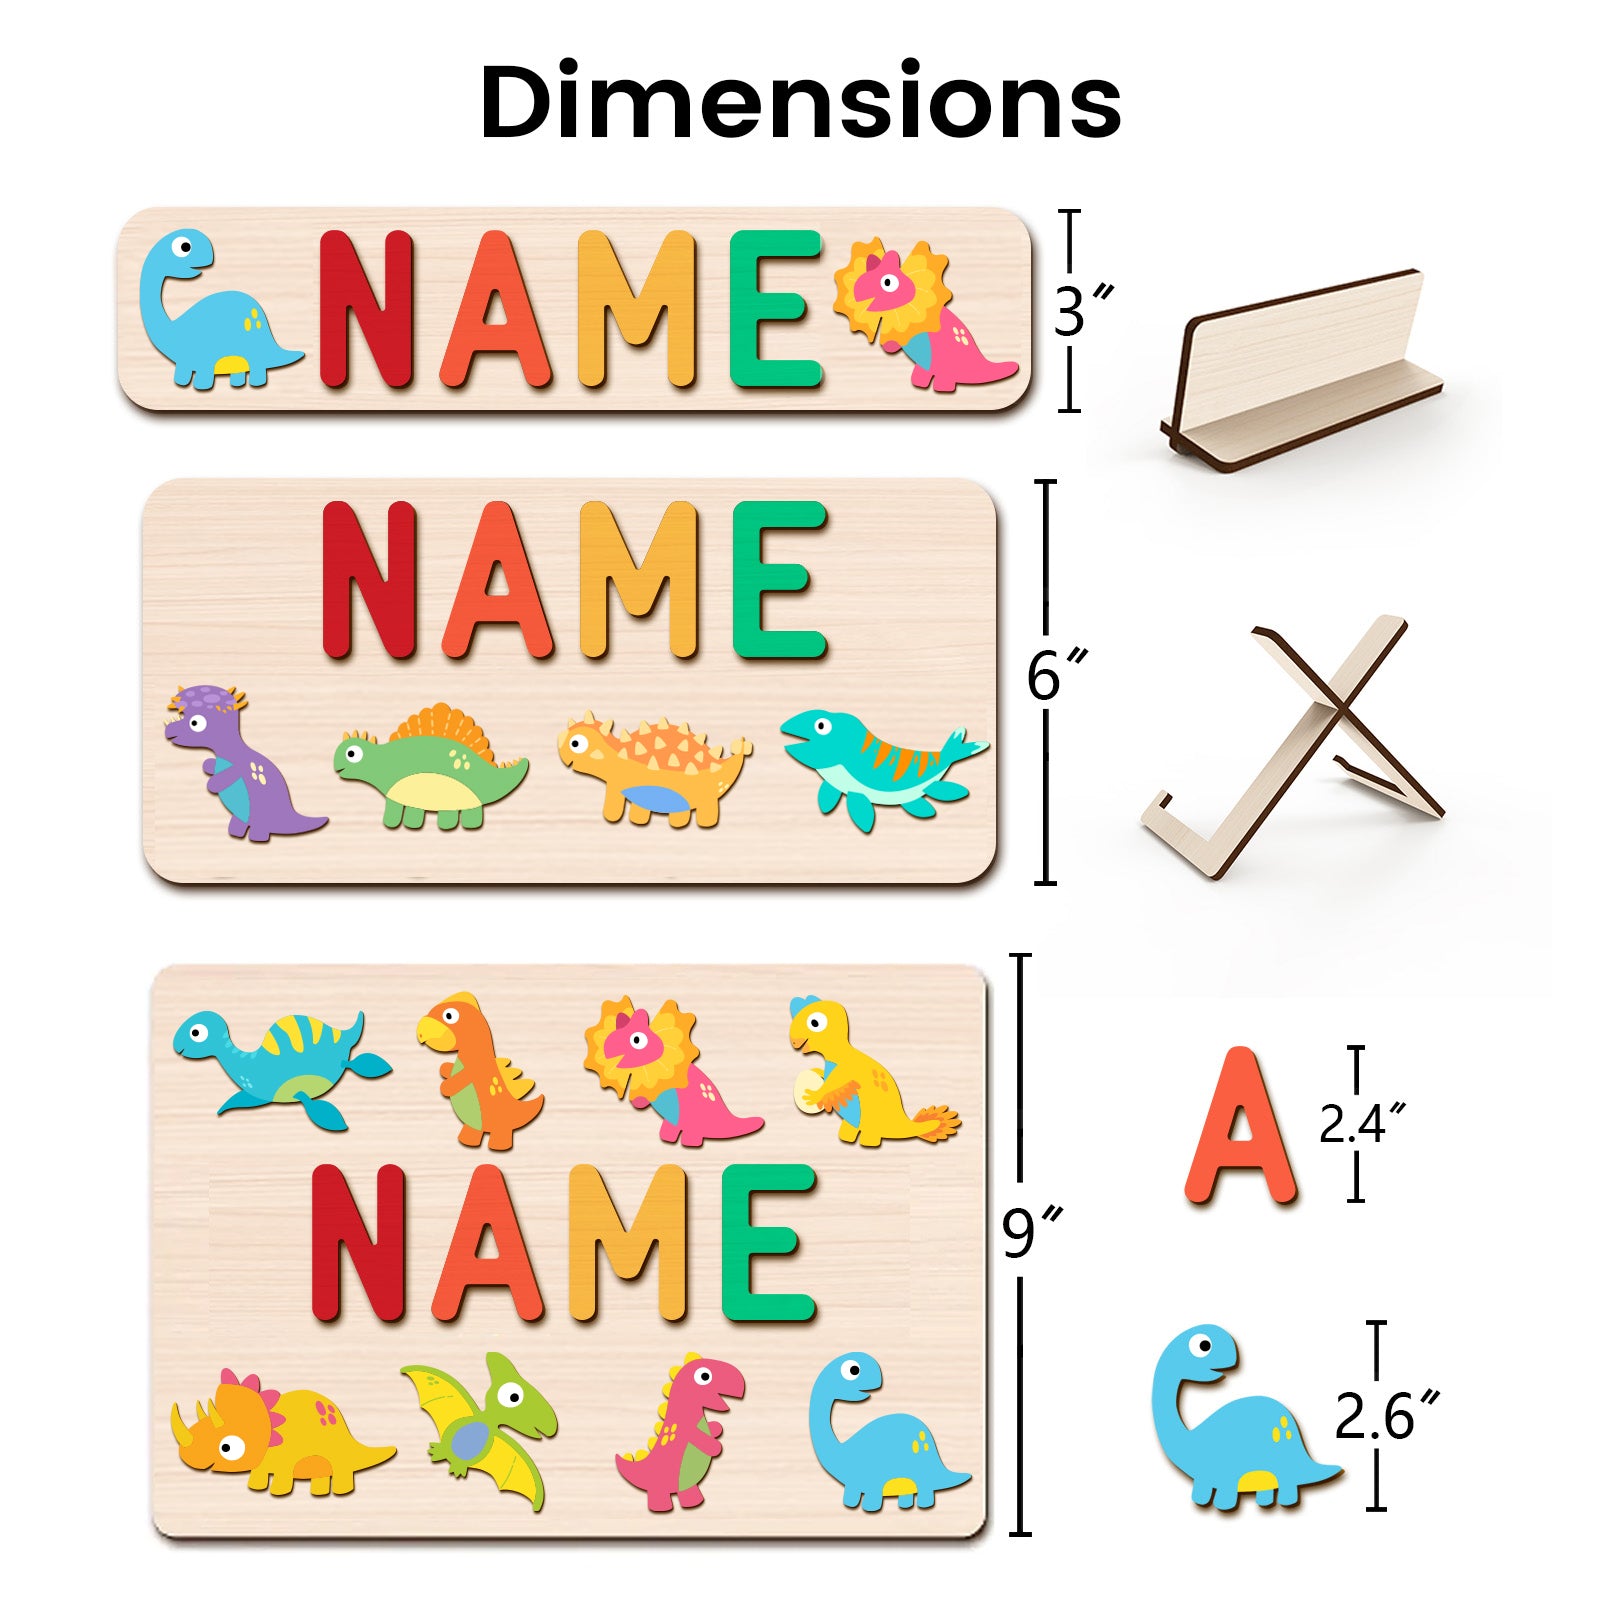 Personalized Wooden Baby Name Puzzle - Dinosaurs Product Name: Personalized Wooden Name Puzzle - DinosaursMaterial: Eco-Friendly Plywood BasswoodLetters Available: Up to 8Engraving Messages: AvailableNon-Toxic: YesNon-Harmful: Yes Our bestselling Name Puz